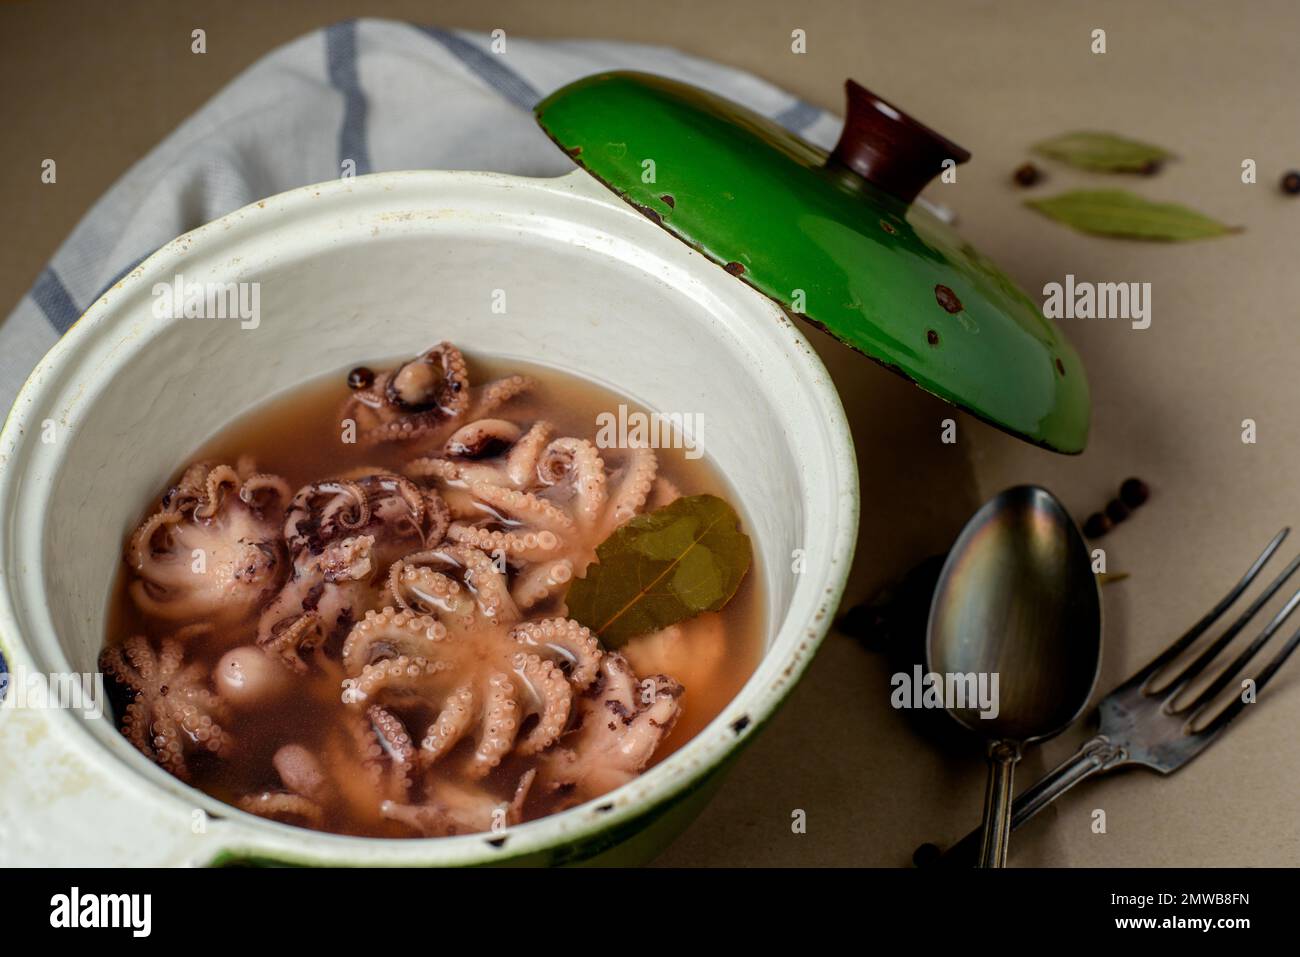 Boiled octopus is in the casserole. Pulpo a la Gallega (Galician-style octopus) is a typical dish from Galicia. Stock Photo